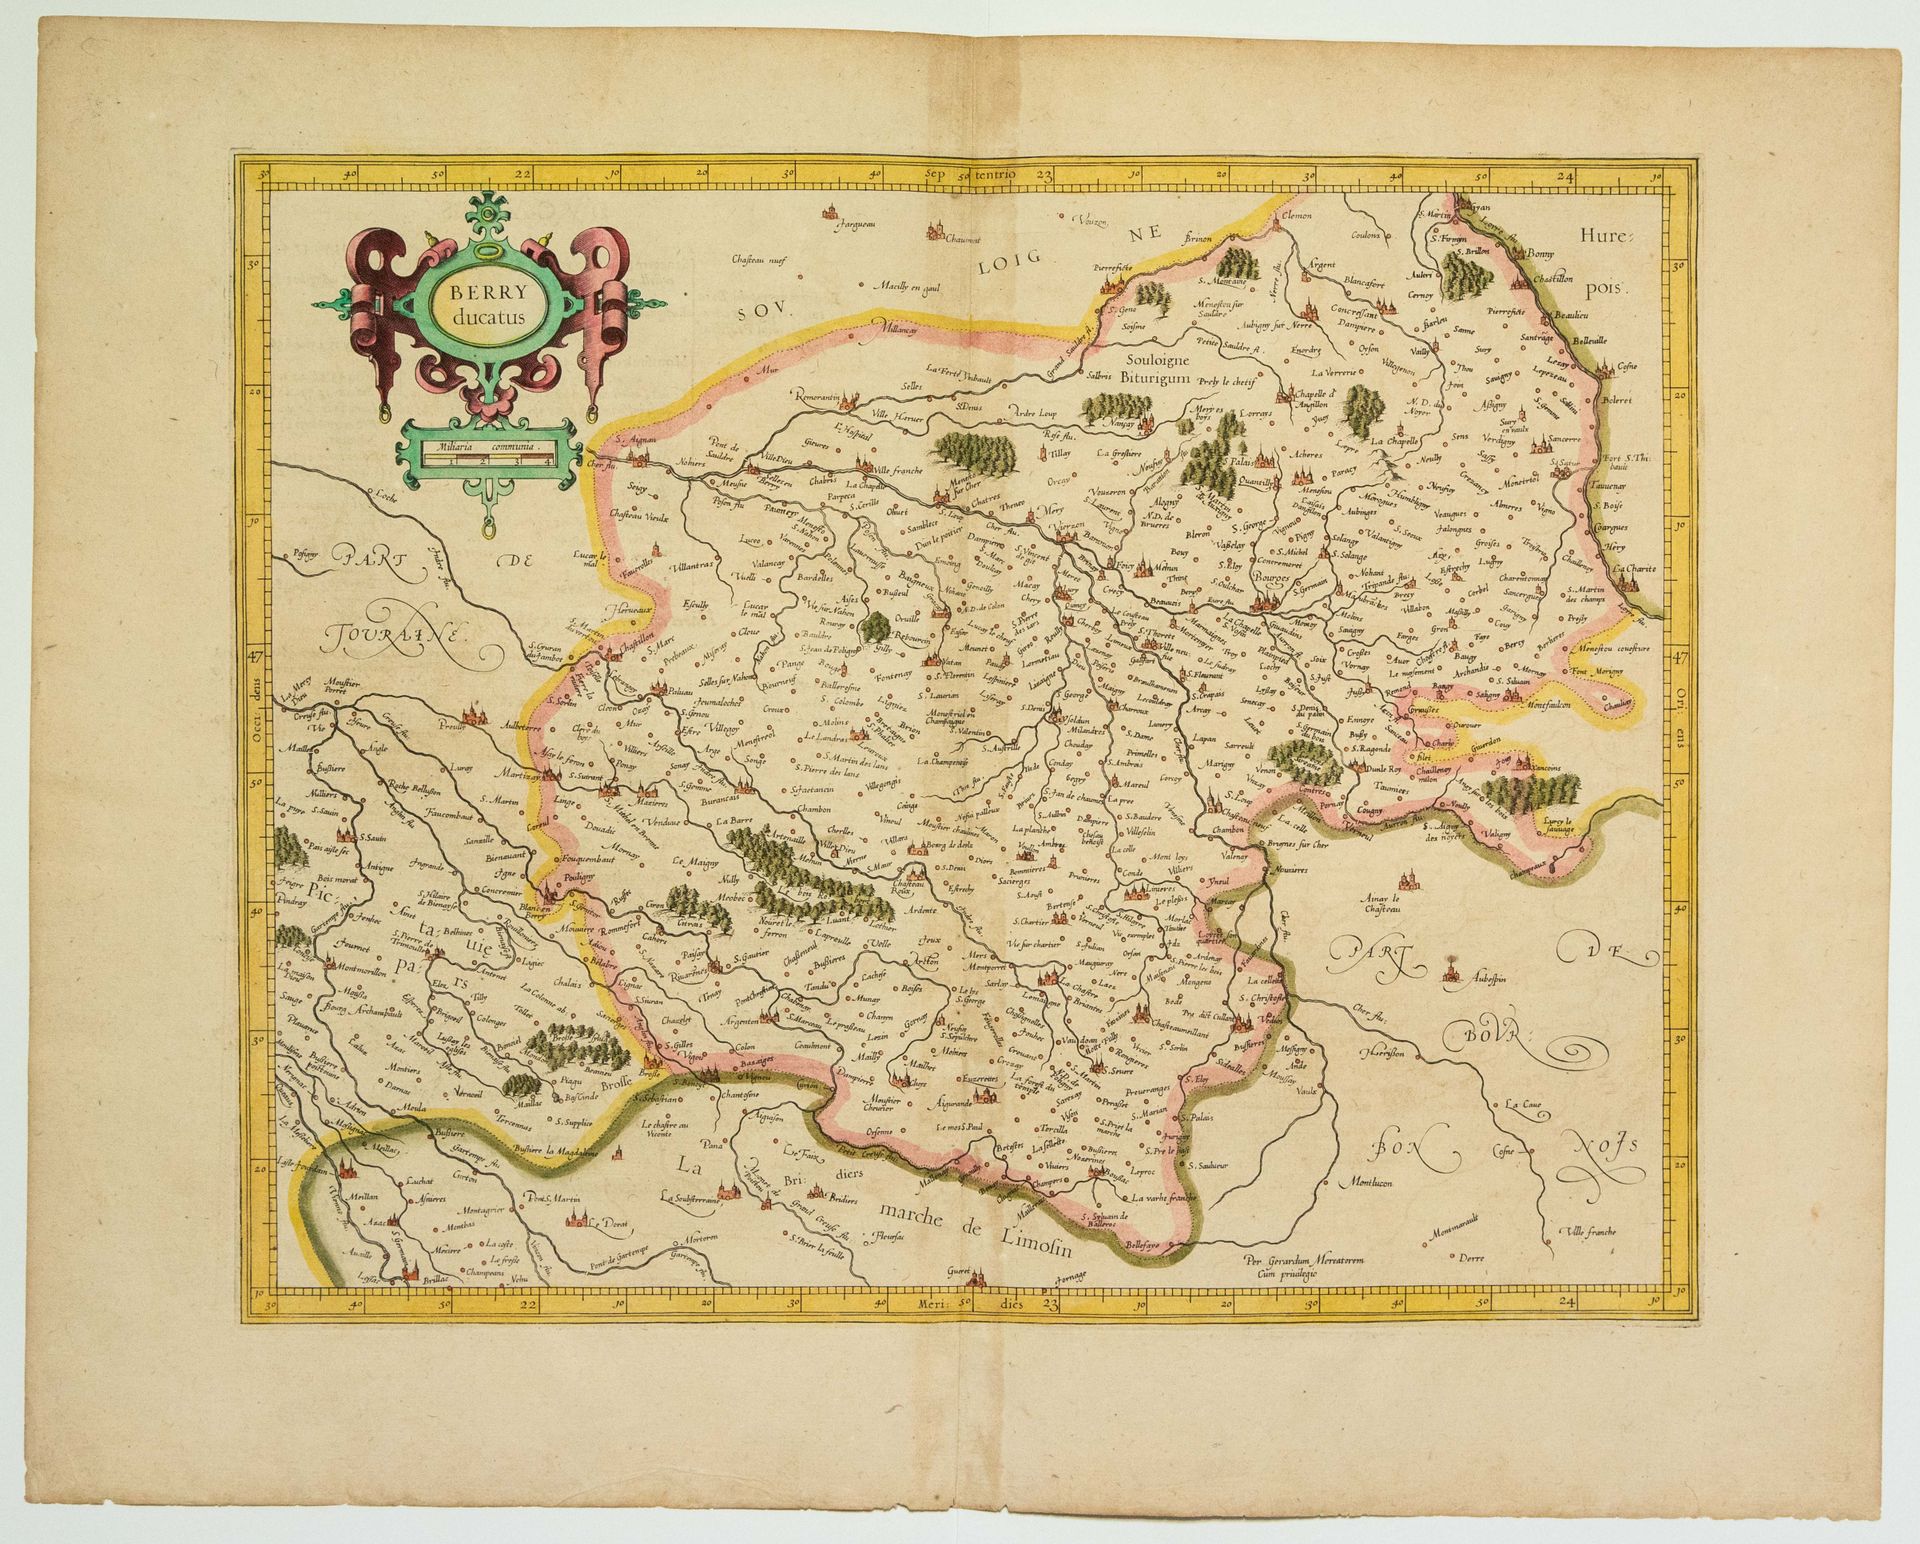 Null 17th century map: "BERRY Ducatis" (c.1634) (54 x 43 cm) Condition B+. Text &hellip;